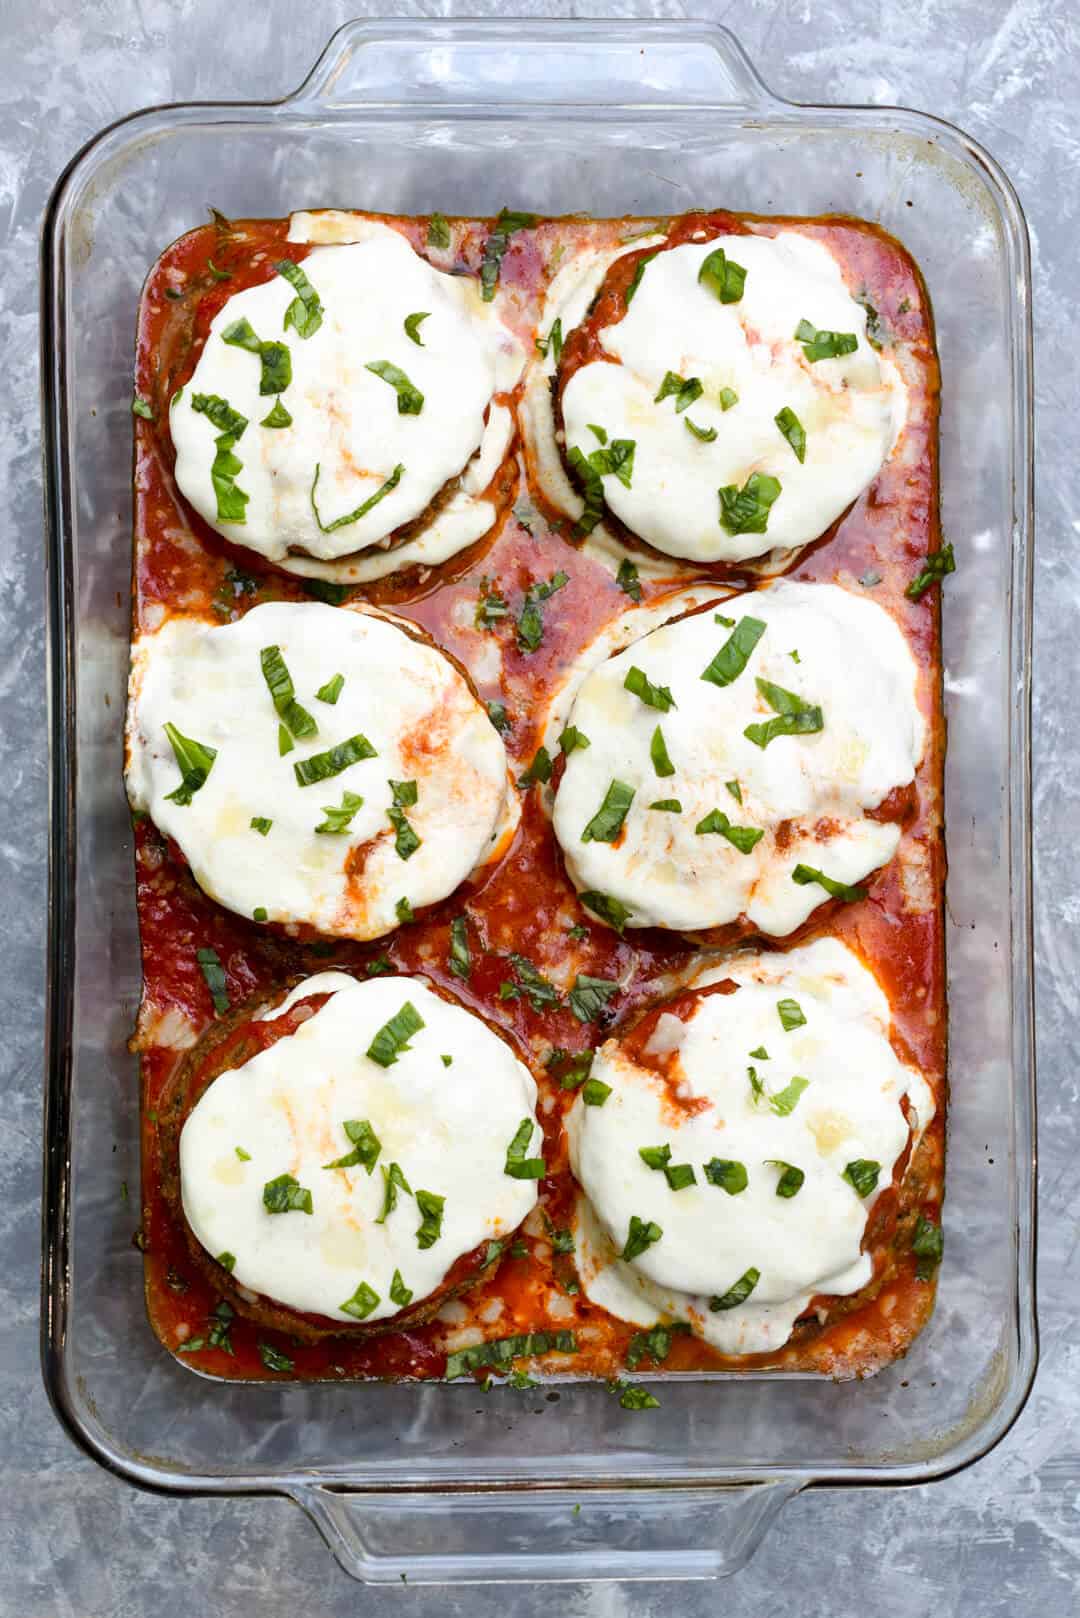 Baked Eggplant Parmesan Recipe (and Video!) | Valerie's Kitchen